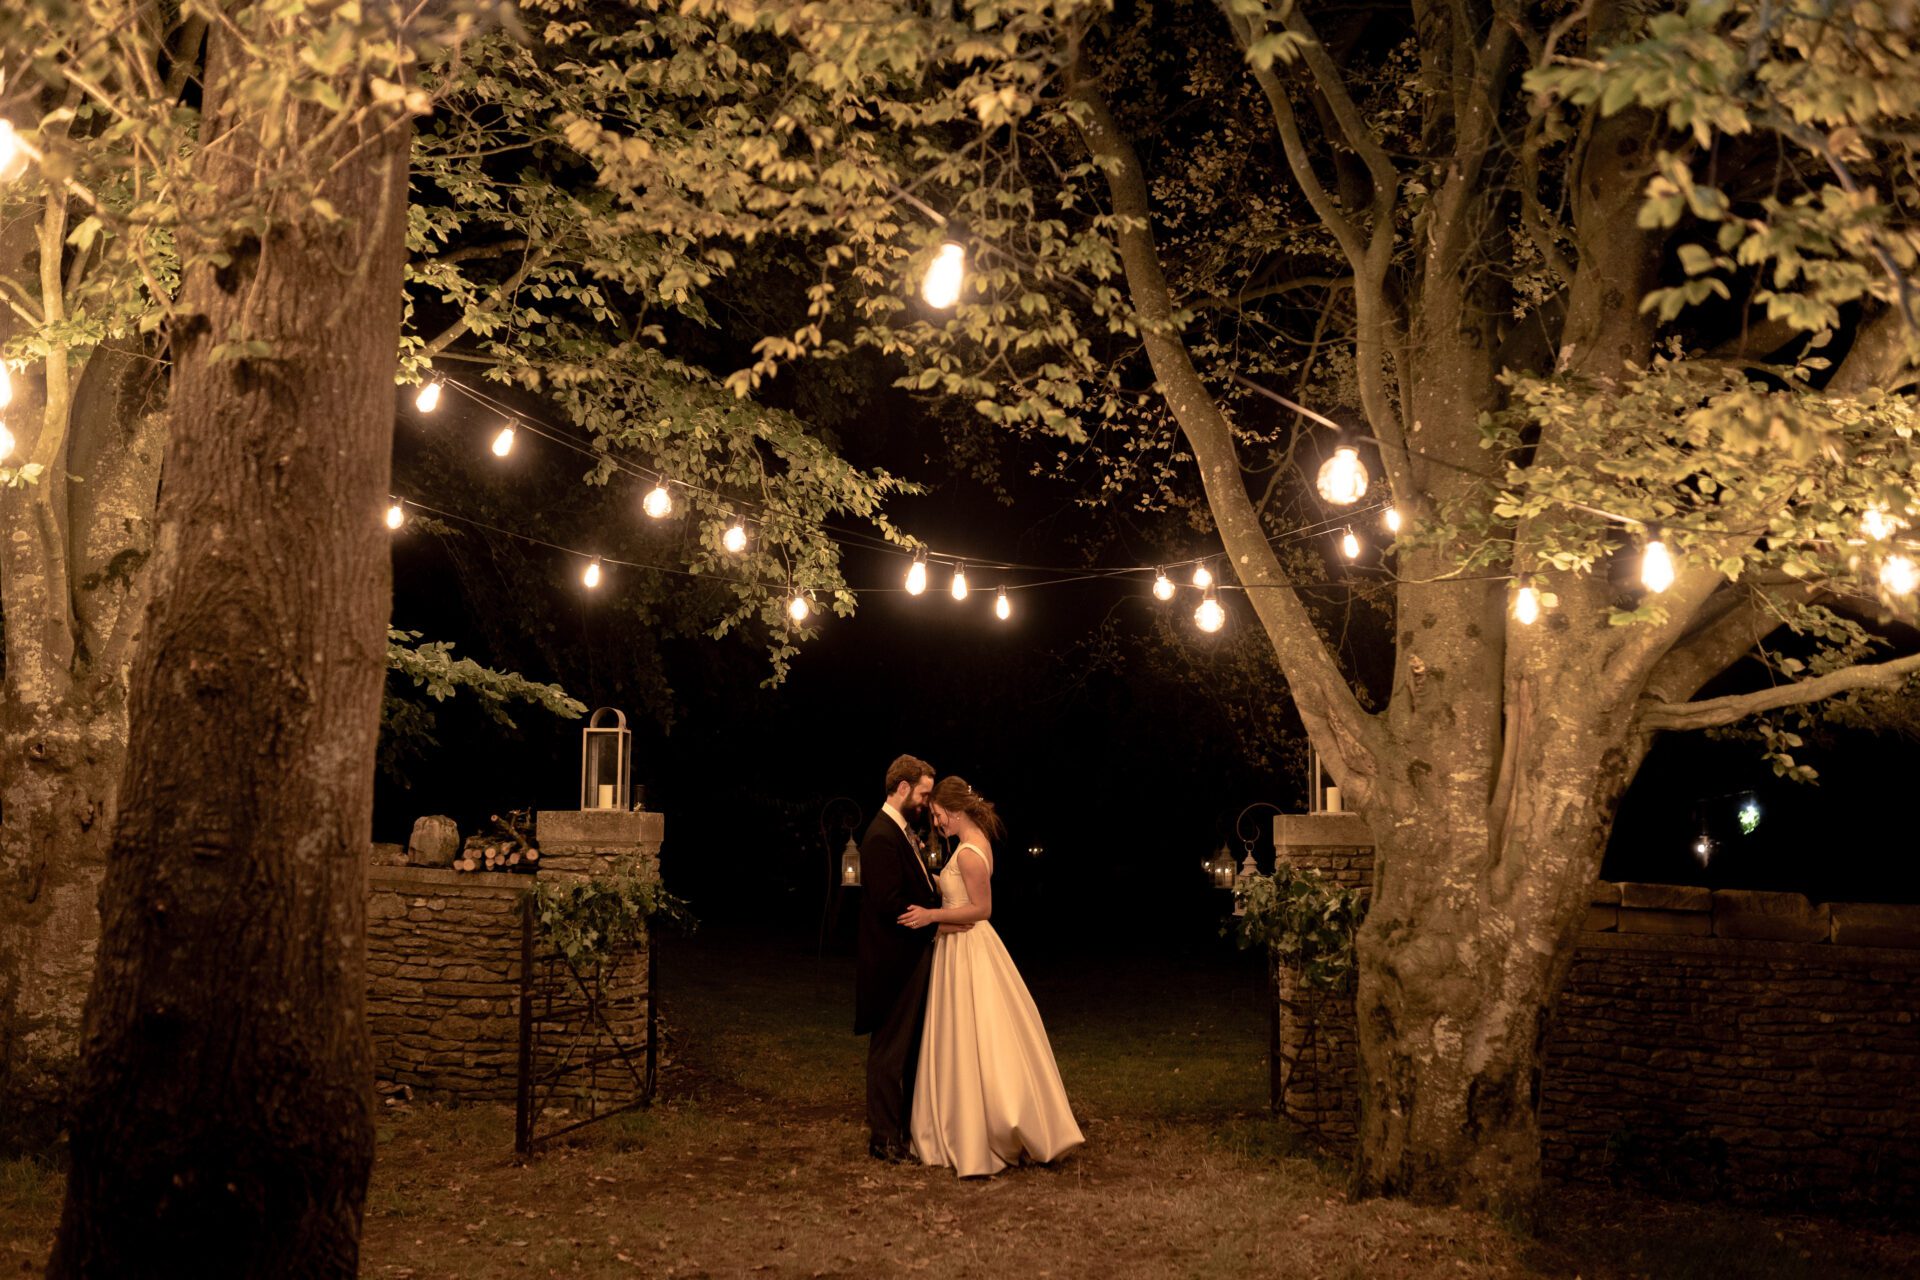 Nighttime couples portraits at a Somerset marquee wedding